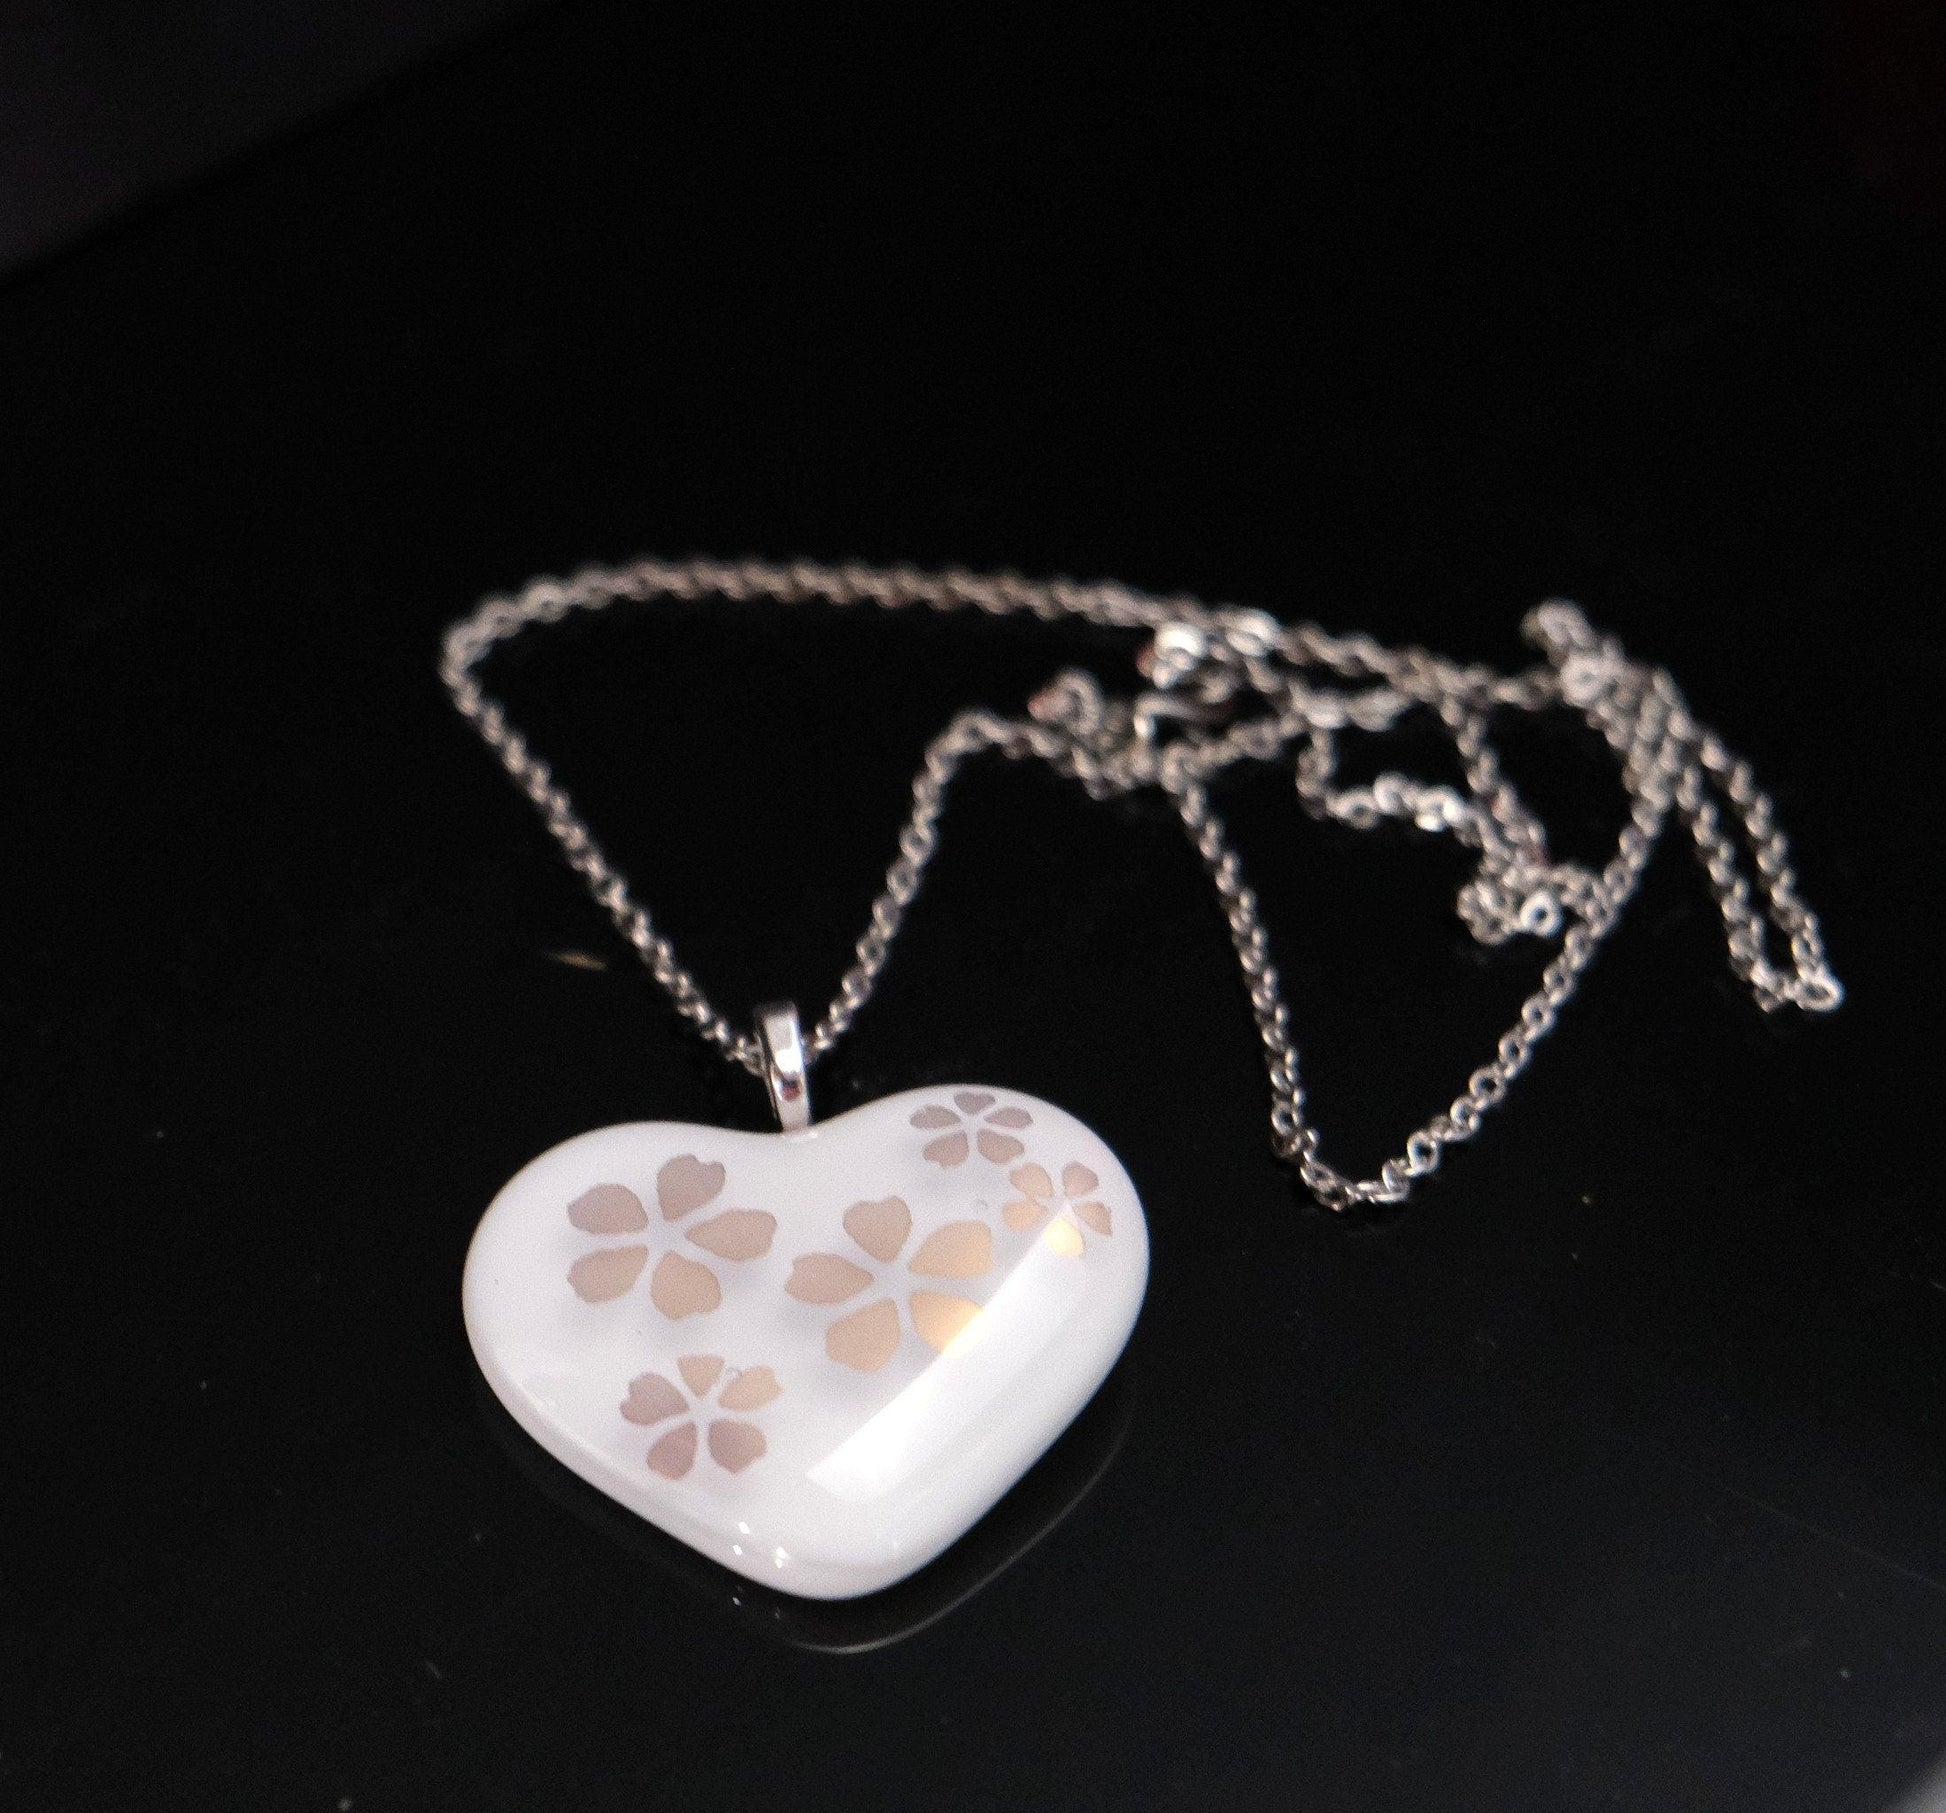 White Fused Glass Heart with Goldish flowers Pendant necklace on 20 inch stainless steel chain seeds glassworks seedsglassworks